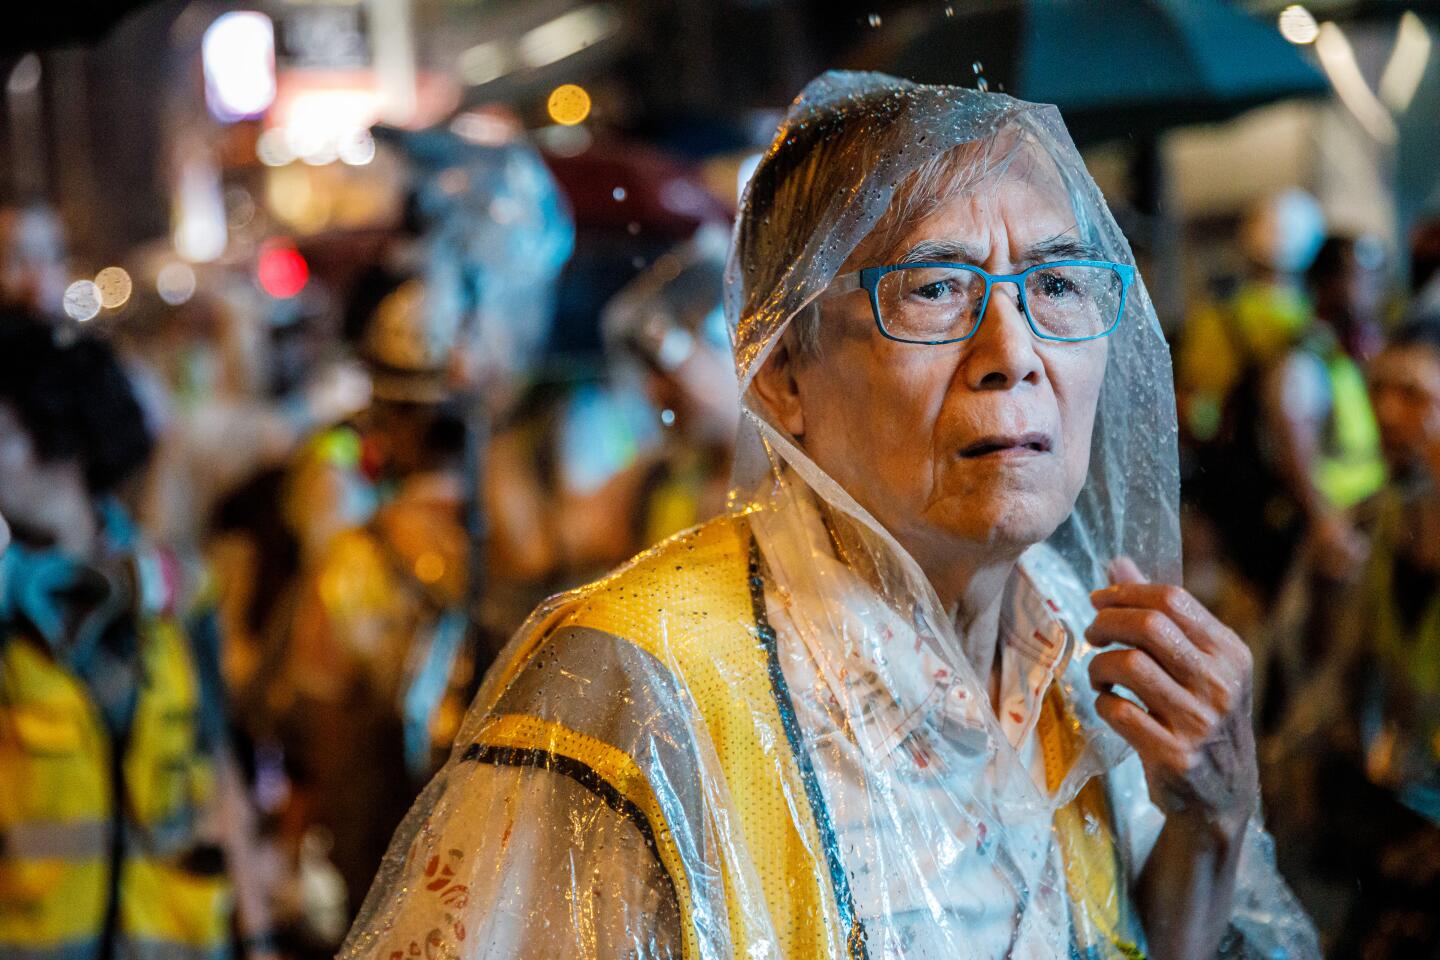 Uncle Wong, a member of the Protect the Children, a community group who put themselves between the police and young protesters against the government, looks carefully down Nathan road for police presence.